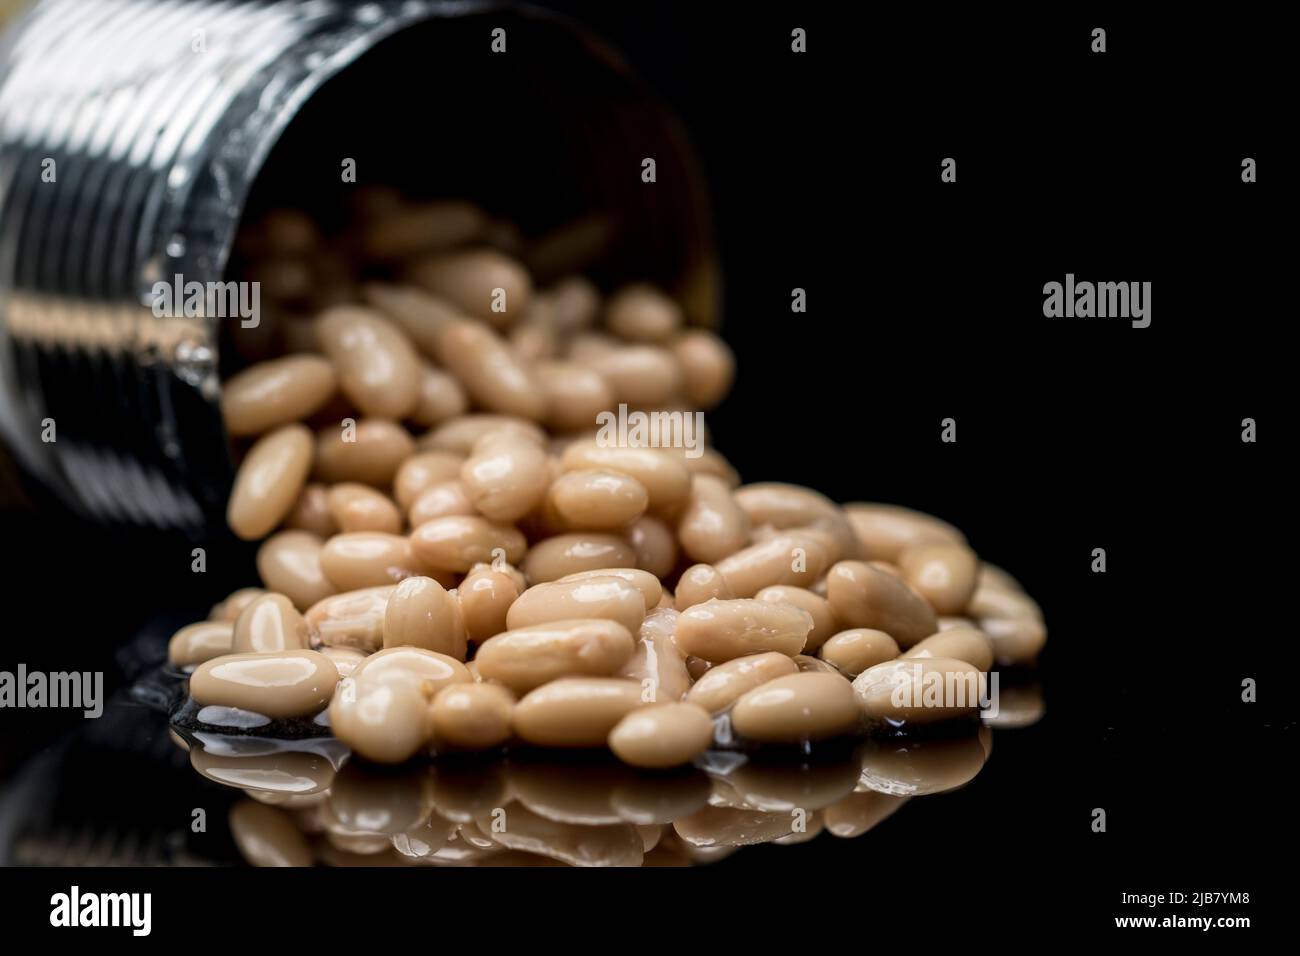 Wasted food spilled beans from a can. Food supplies expired. Stock Photo